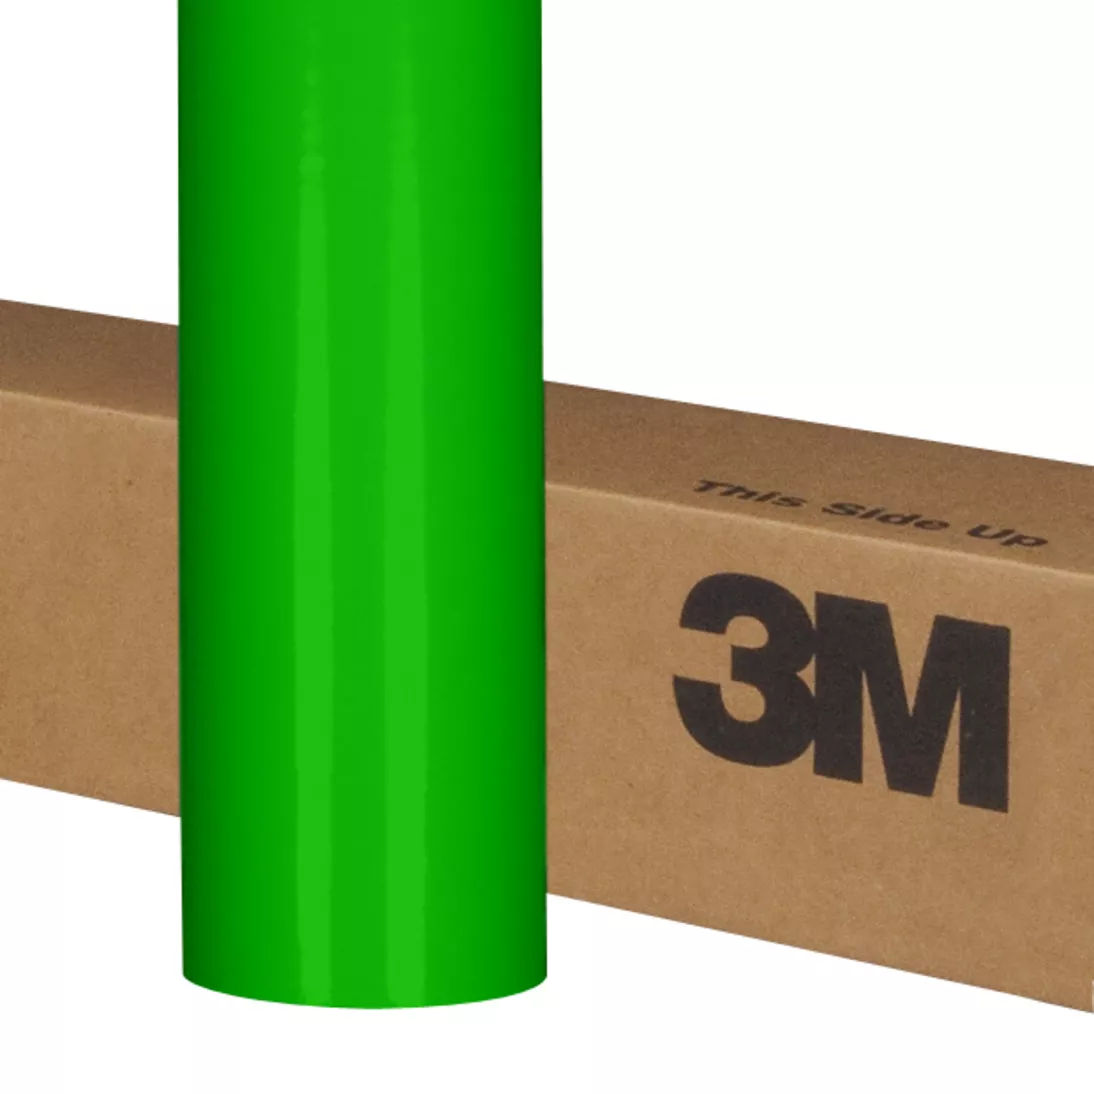 3M™ Scotchcal™ ElectroCut™ Graphic Film 7125-196, Apple Green, 48 in x
50 yd